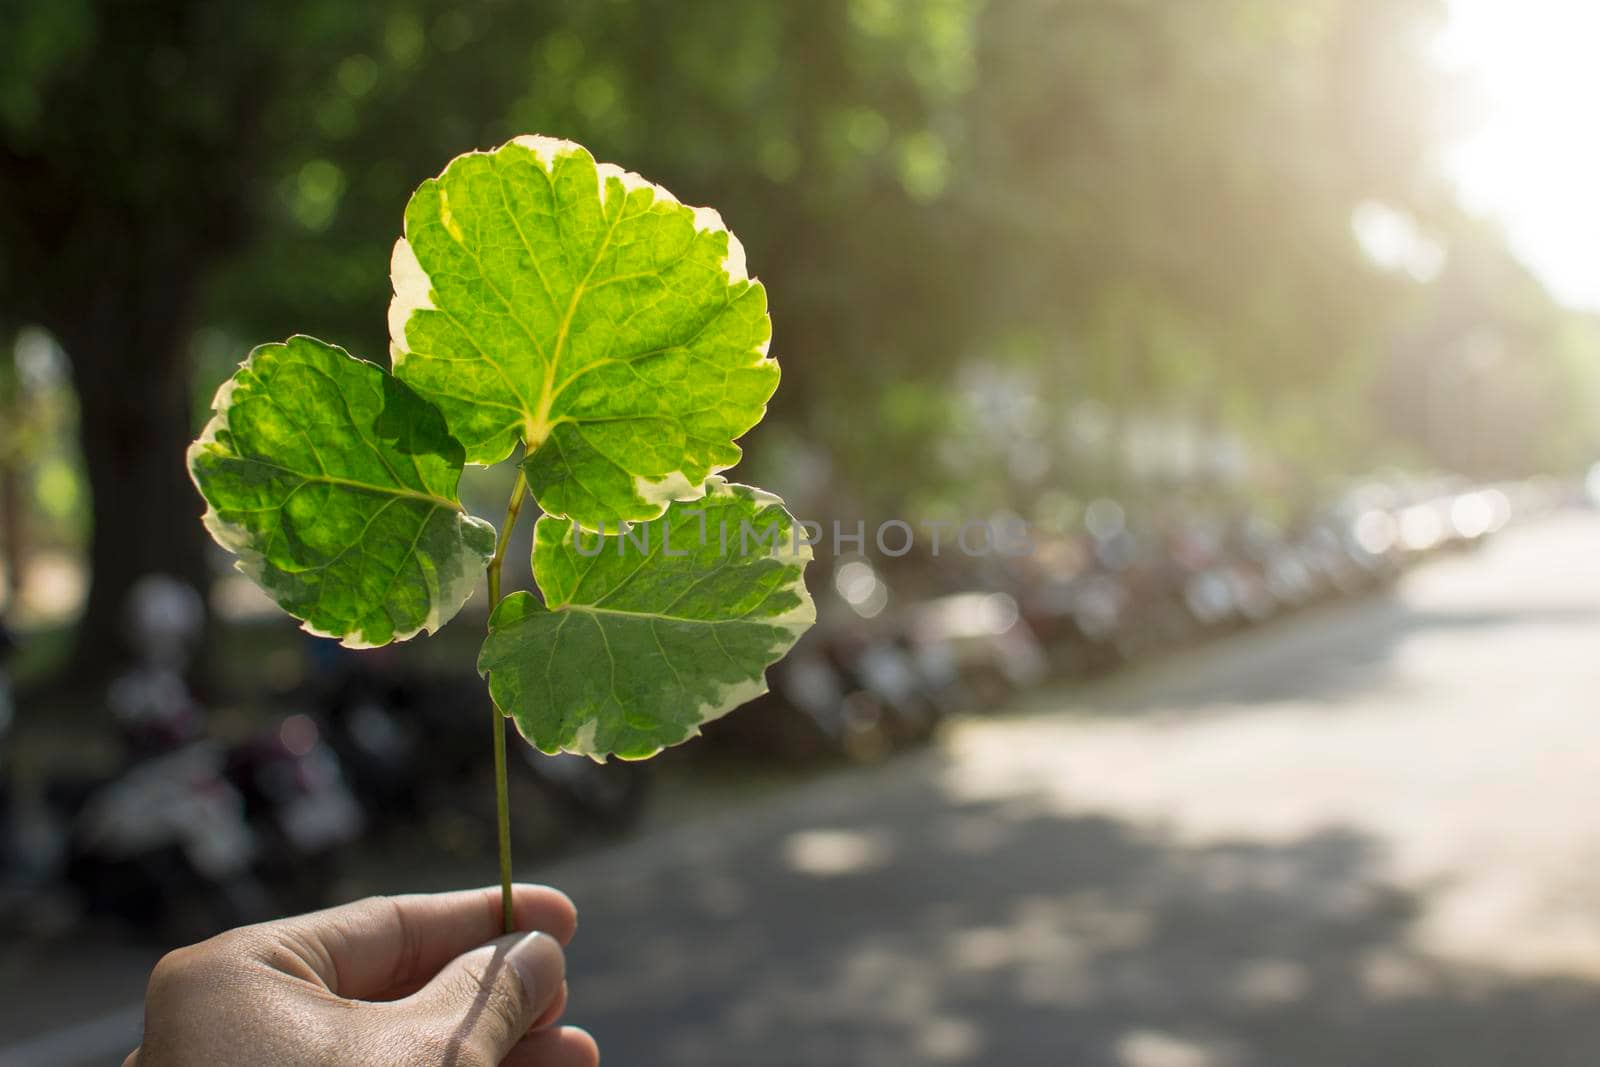 Hand holding green leaf with light background.